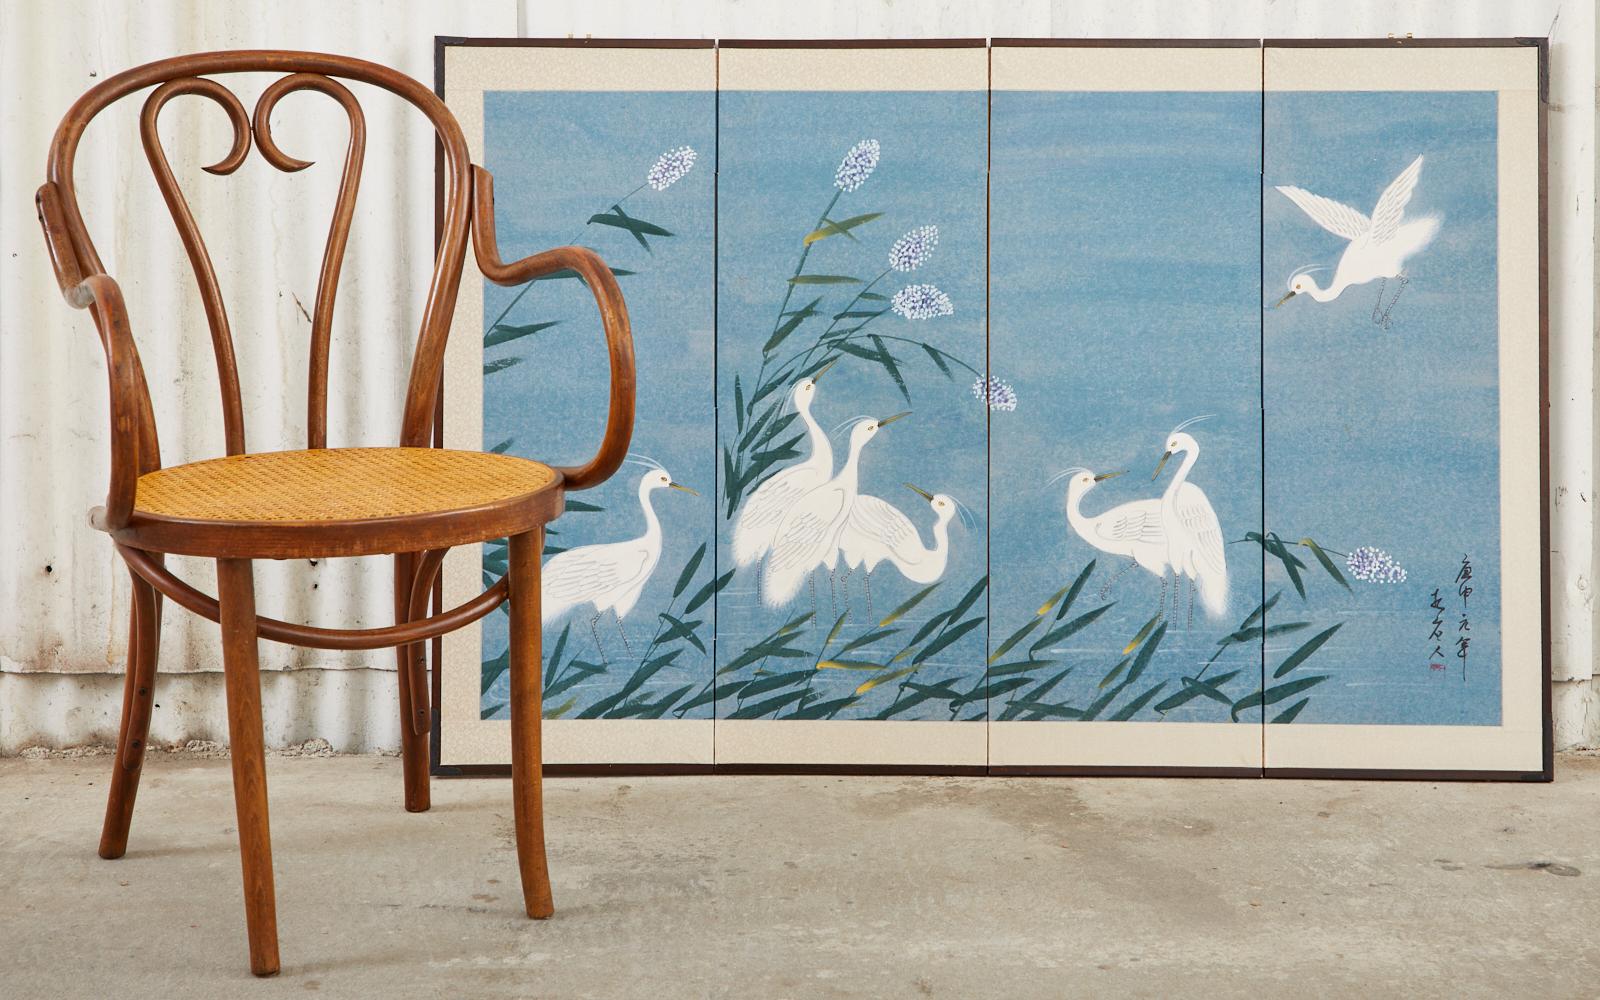 Delightful Japanese Showa period four-panel byobu screen. Depicting a siege of white herons in an idyllic blue landscape. Ink and color pigments on paper set in a lacquered wood frame with a silk cream colored border. The beautiful white birds